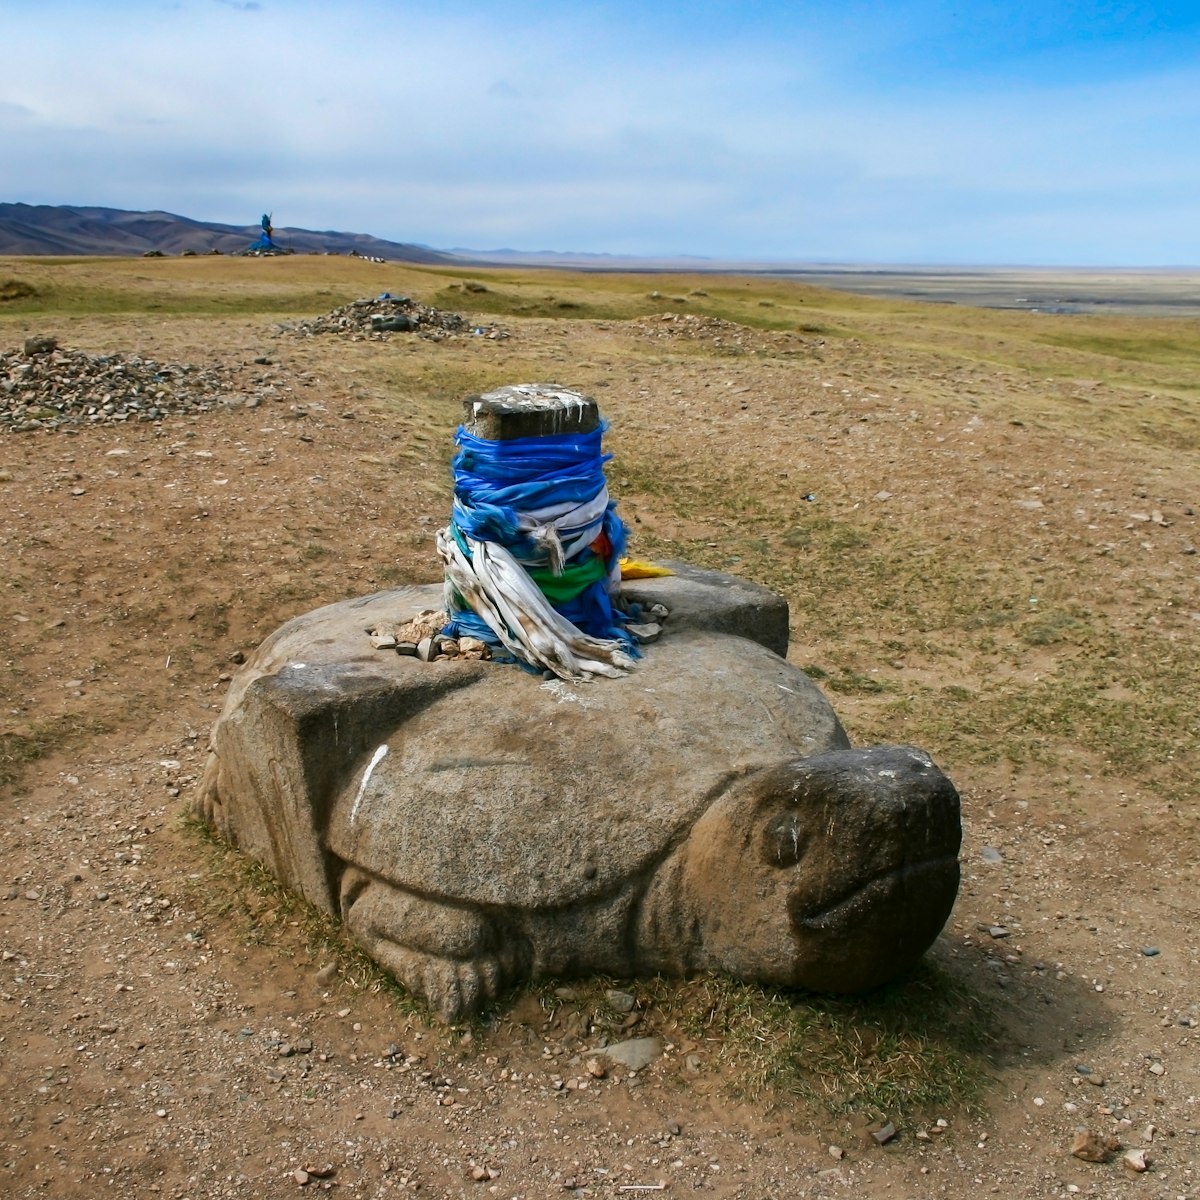 Stone turtle with sacred hadags or khadags (blue silk scarves) close to Erdene Zuu Khiid Monastery, part of the Orkhon Valley, UNESCO Cultural Landscape World Heritage Site, in Kharkhorin or Karakorum, Ovorkhangai Province, Central Mongolia
1187913457
erdene zuu, hadags, karakorum, khadags, kharkhorin, buddhist, sacred, övörkhangai province, central mongolia, nobody, landmark, religious